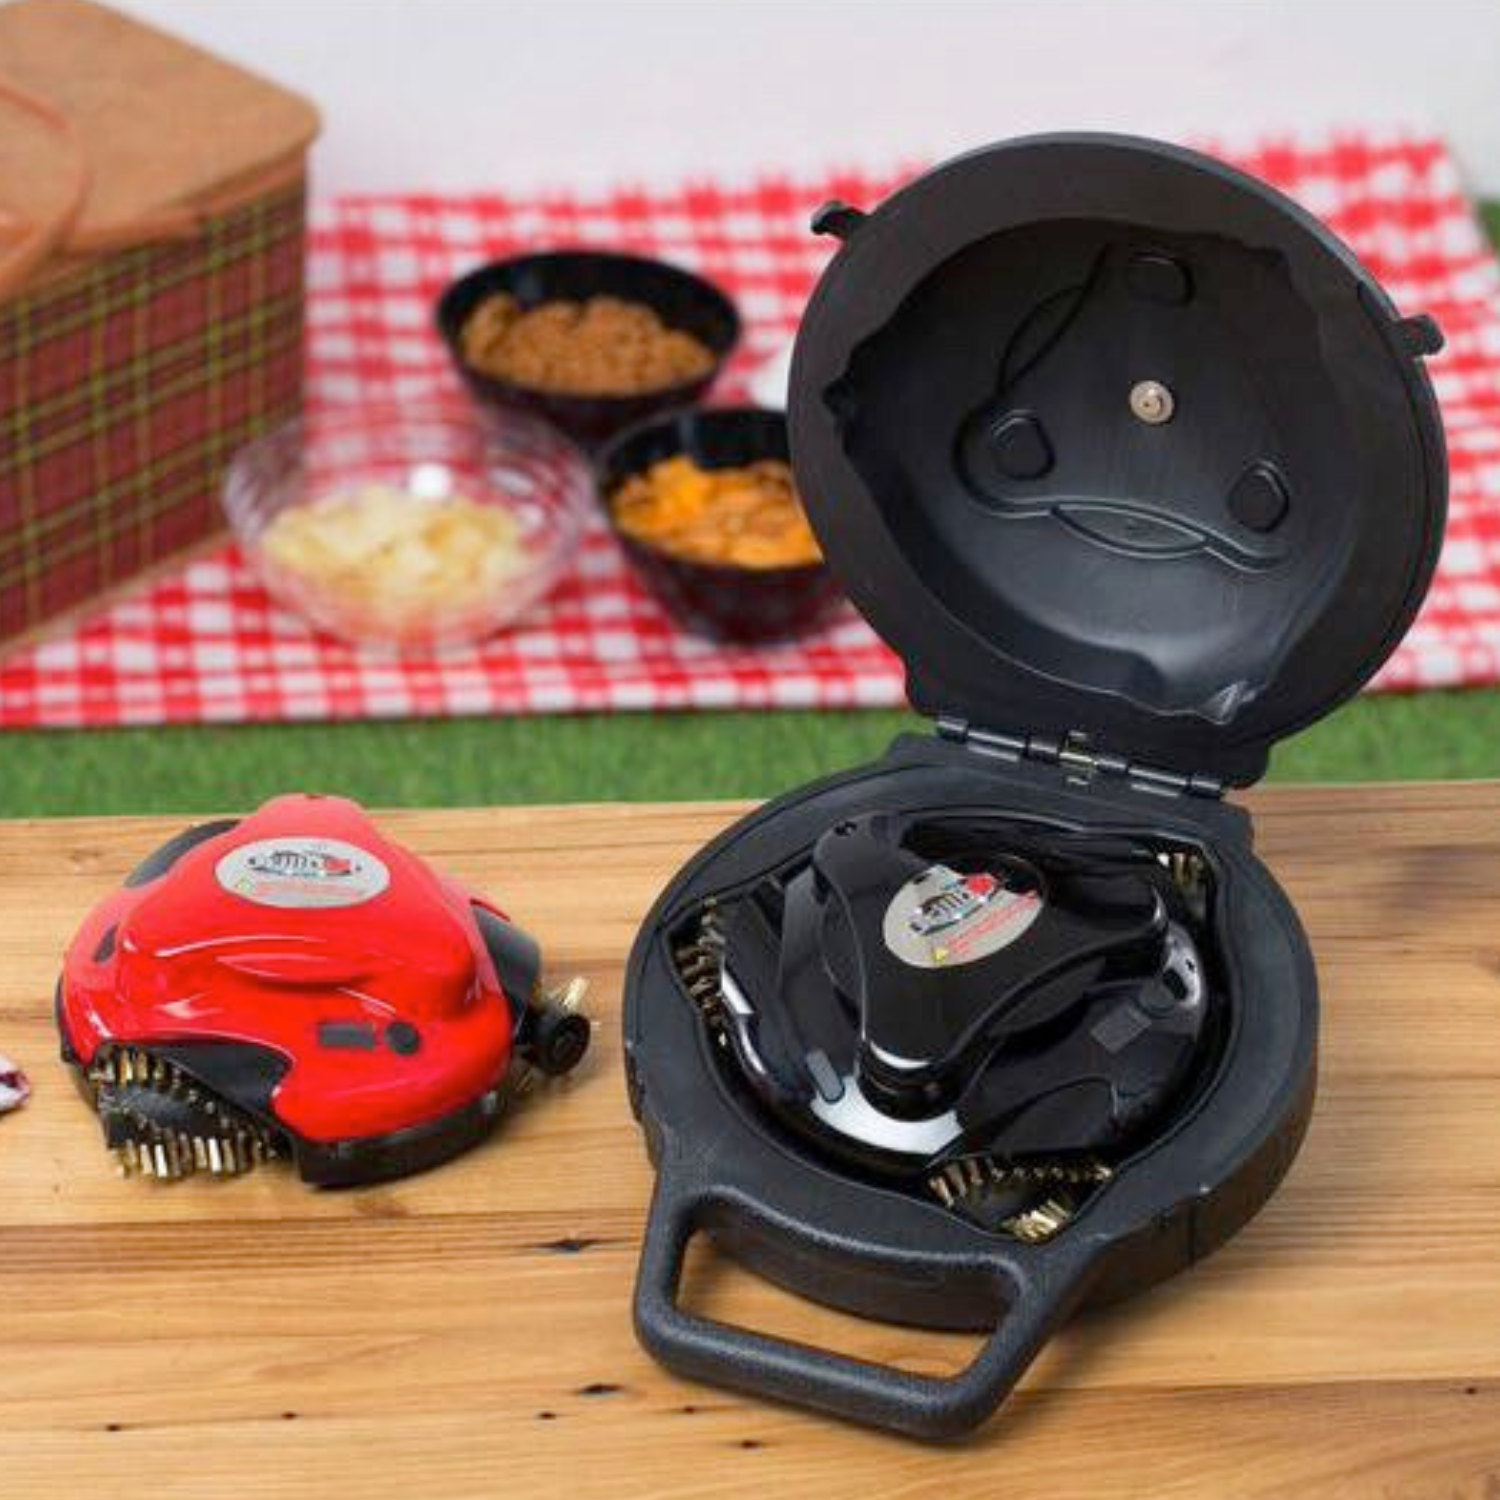 Grillbot Black Automatic Grill Cleaning Robot